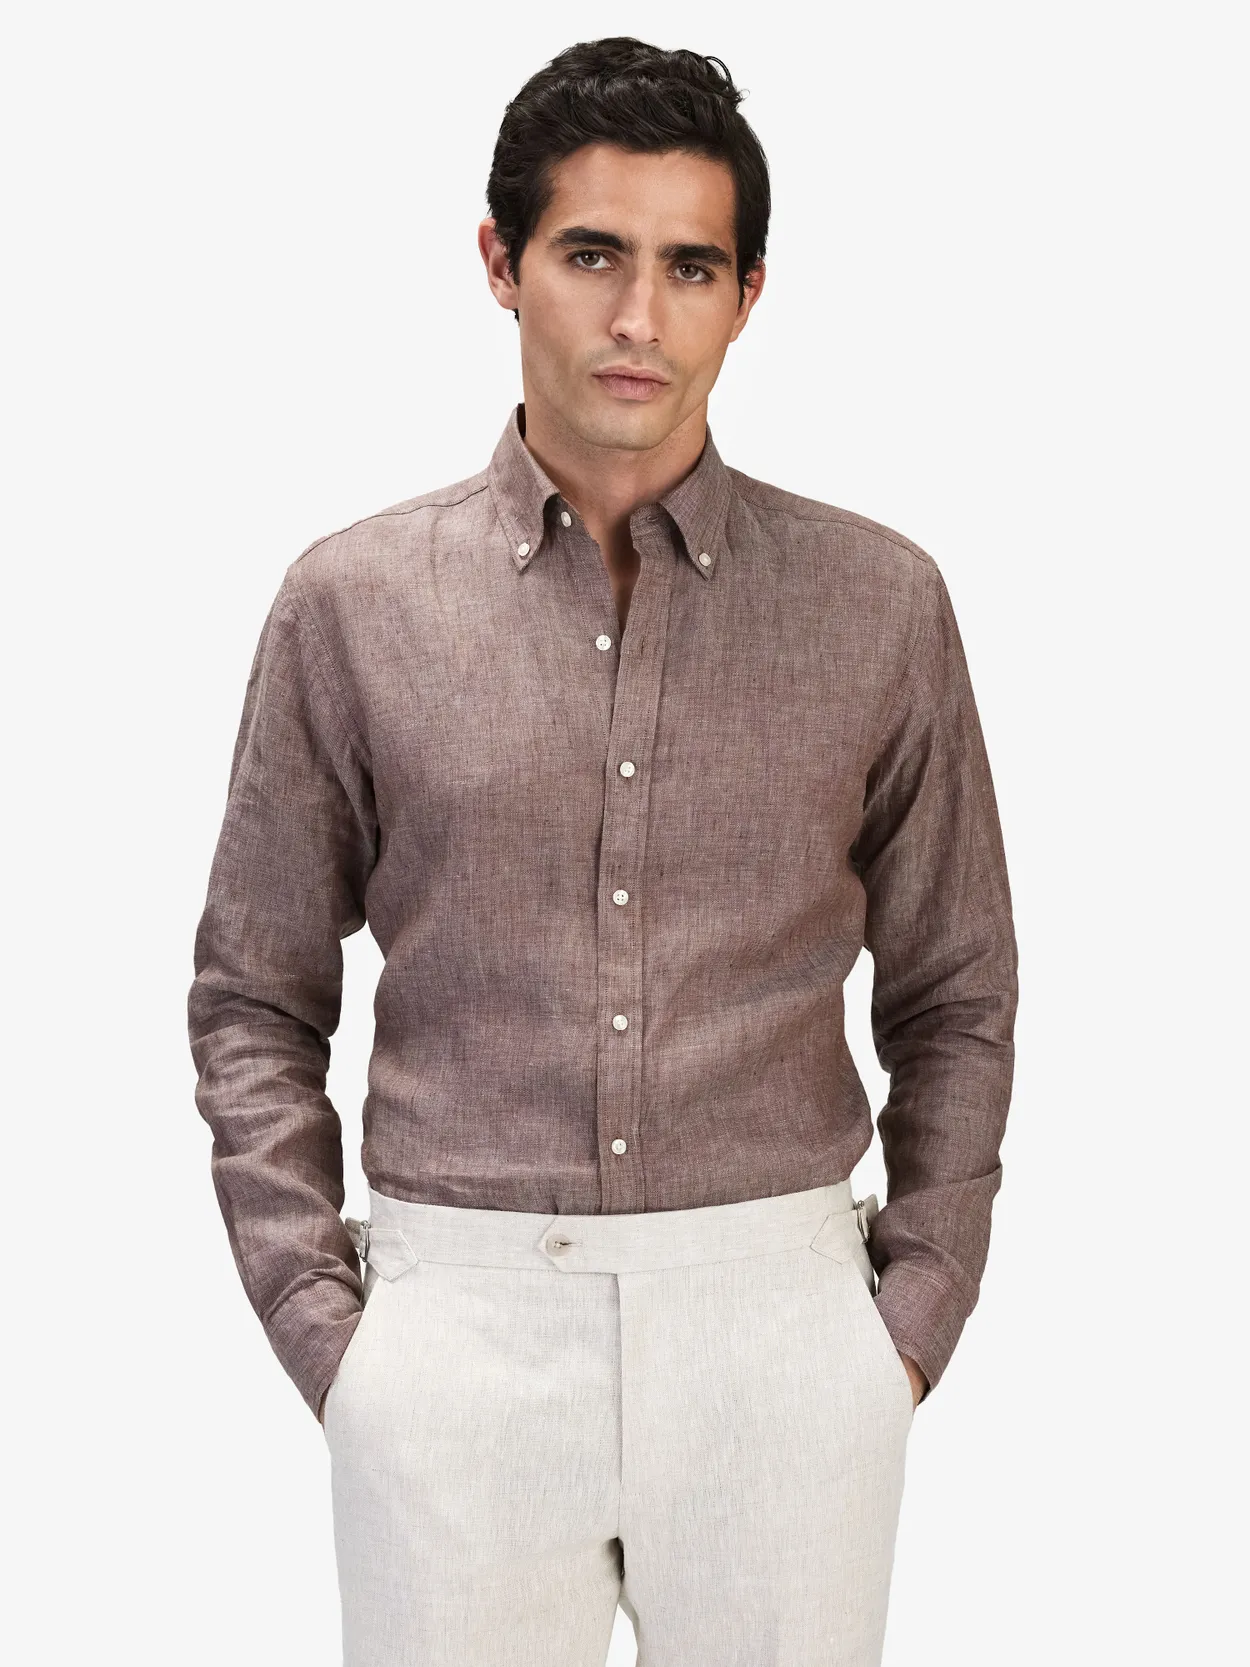 Image number 7 for product Sand Linen Suit & Shirt